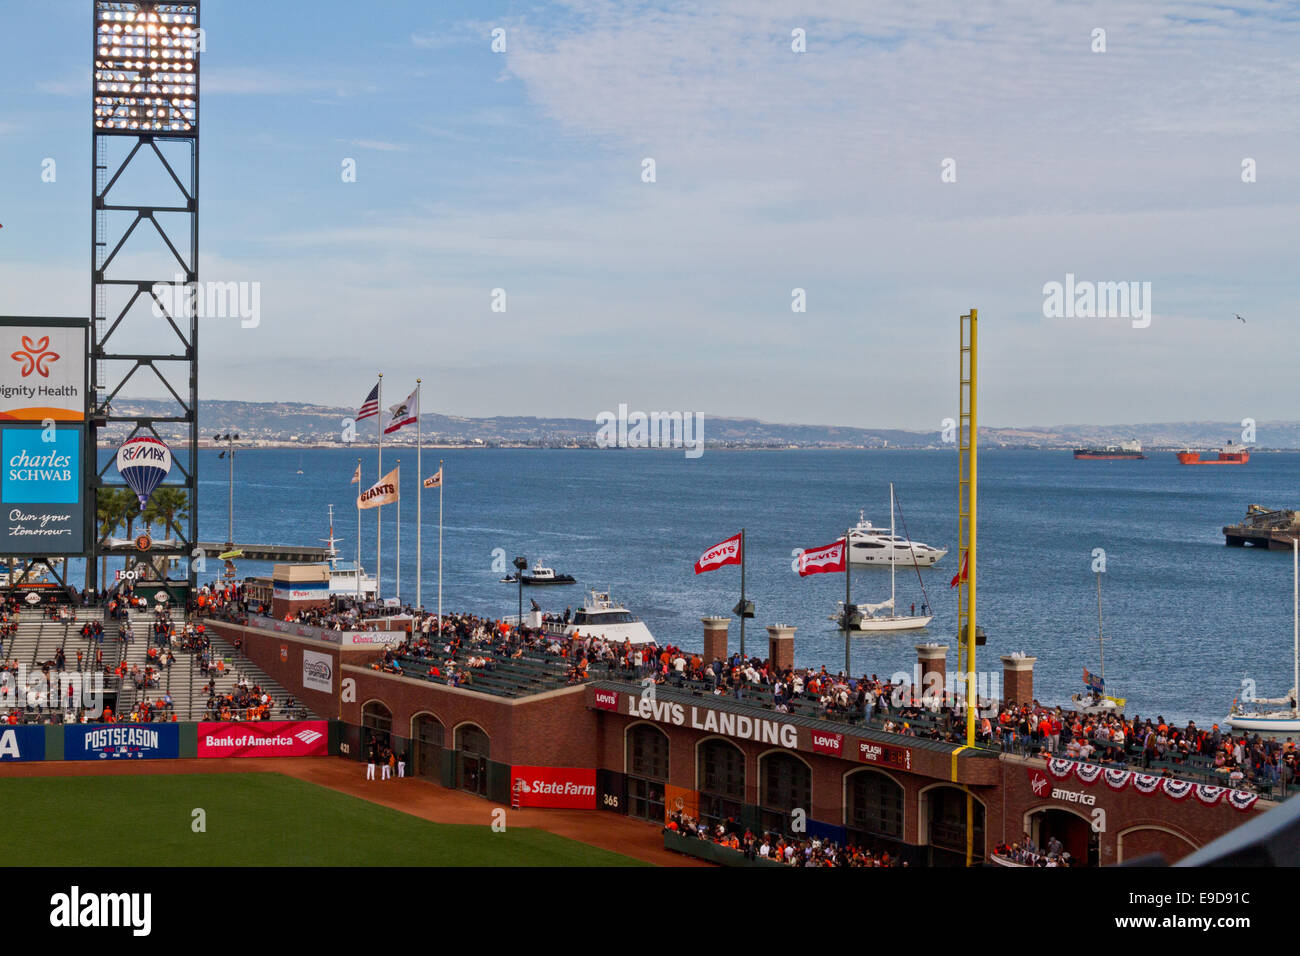 View of right field and McCovey Cove from AT&T Park, home of the San Francisco Giants baseball team during NLCS Stock Photo